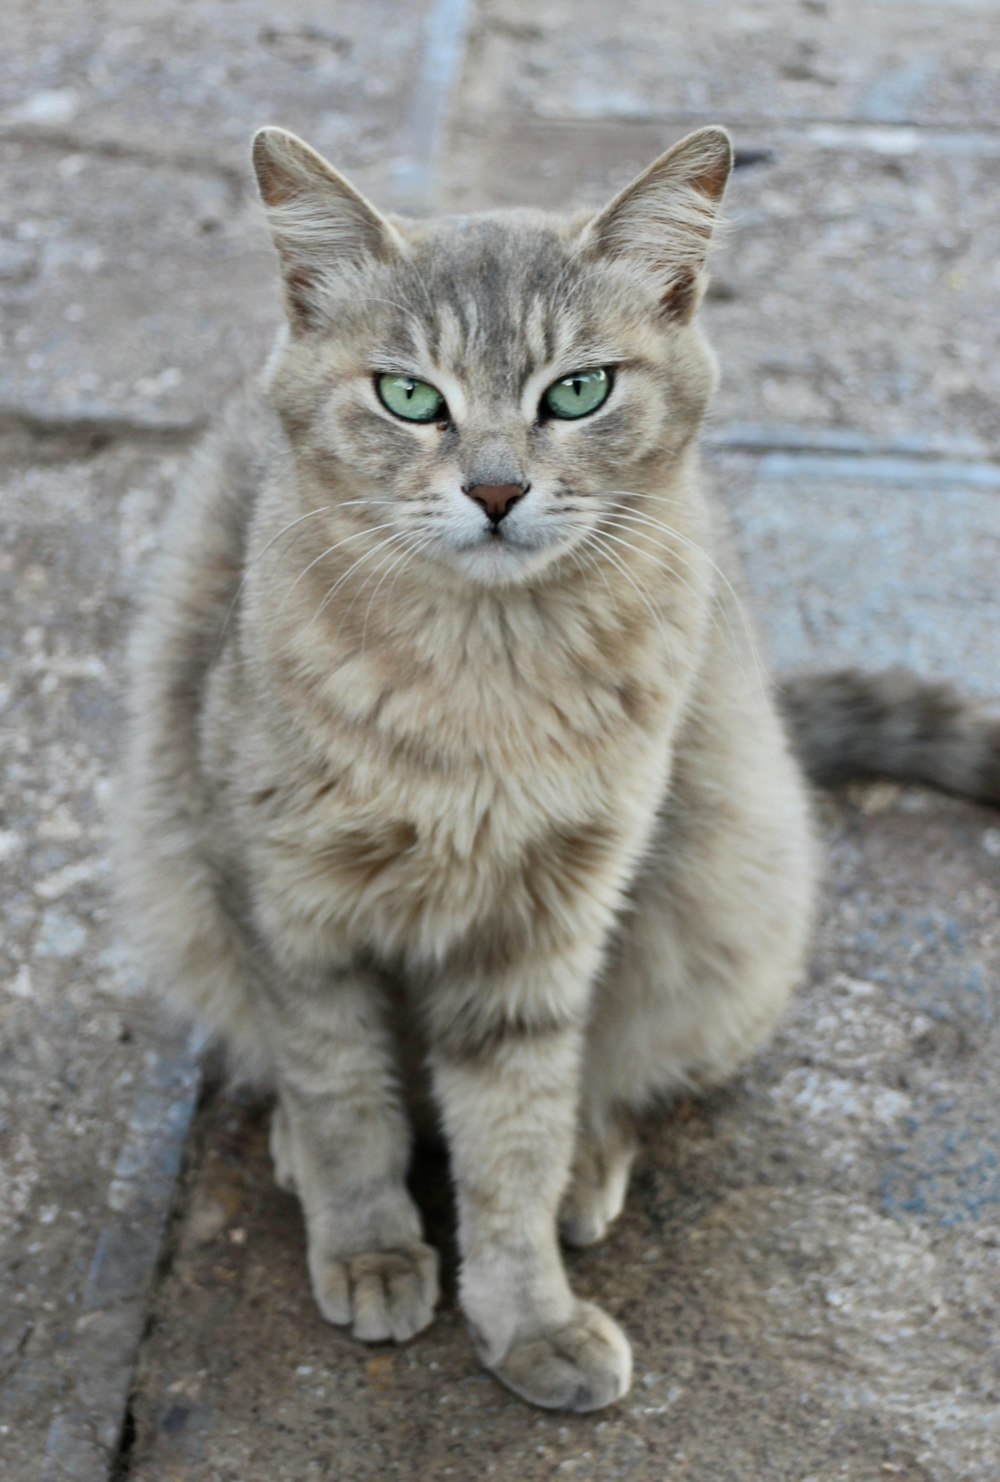 a cat with green eyes sitting on the ground